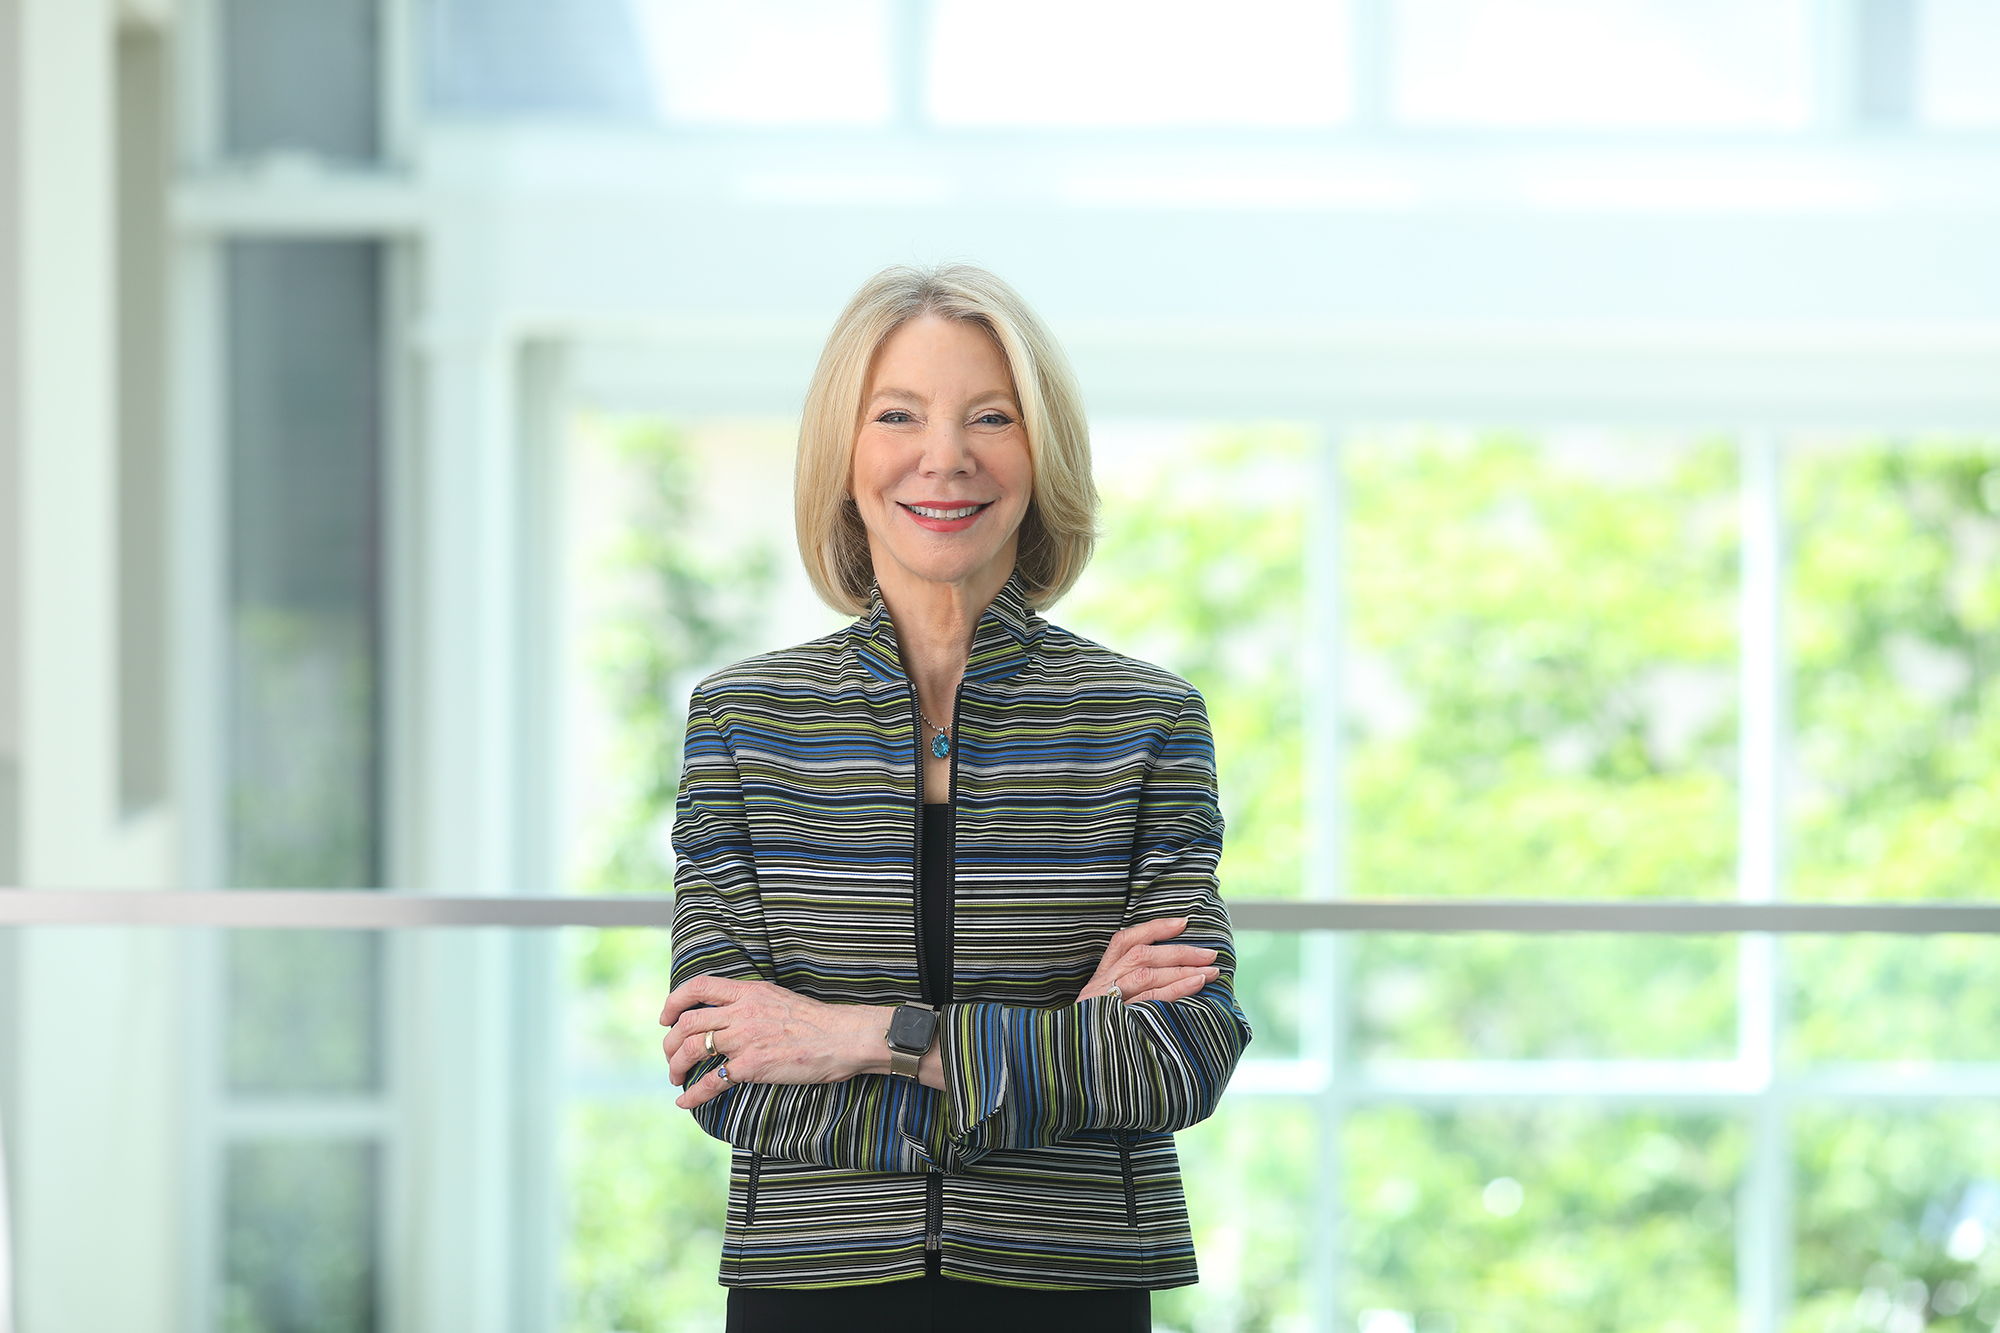 Amy Gutmann stands with arms crossed by a sunlit window.